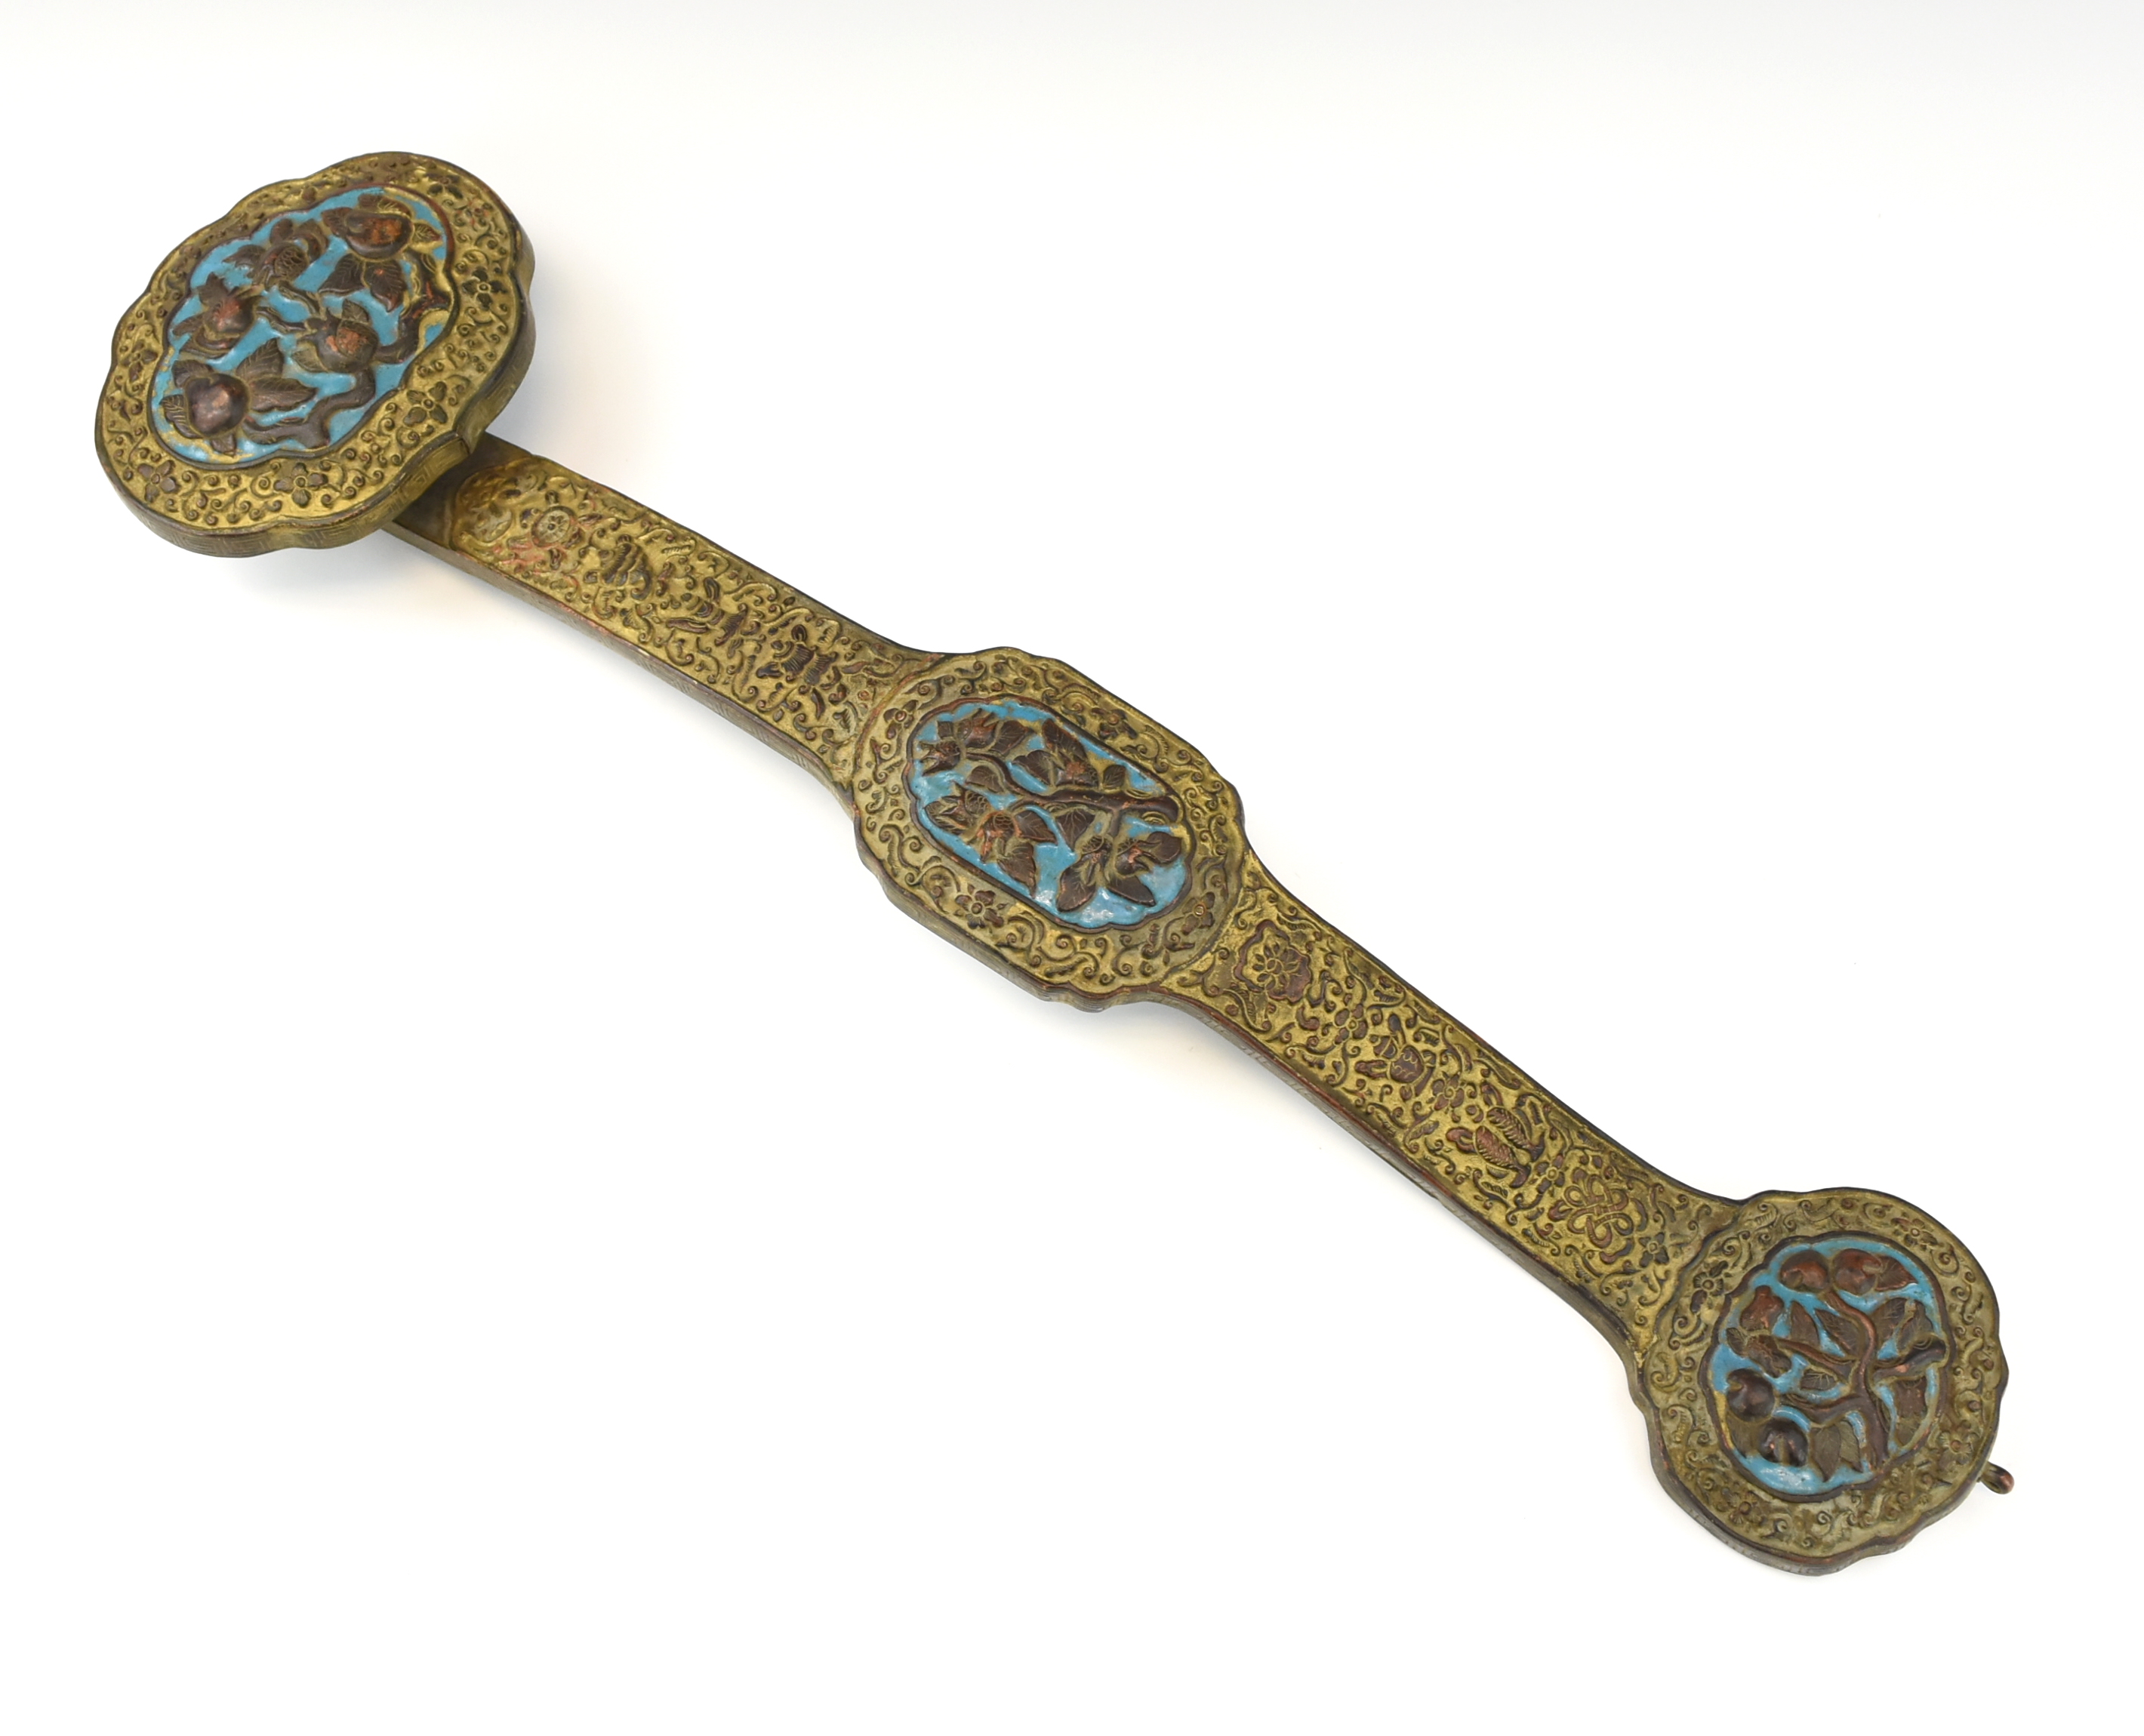 CHINESE CLOISONNE RUYI SCEPTER,